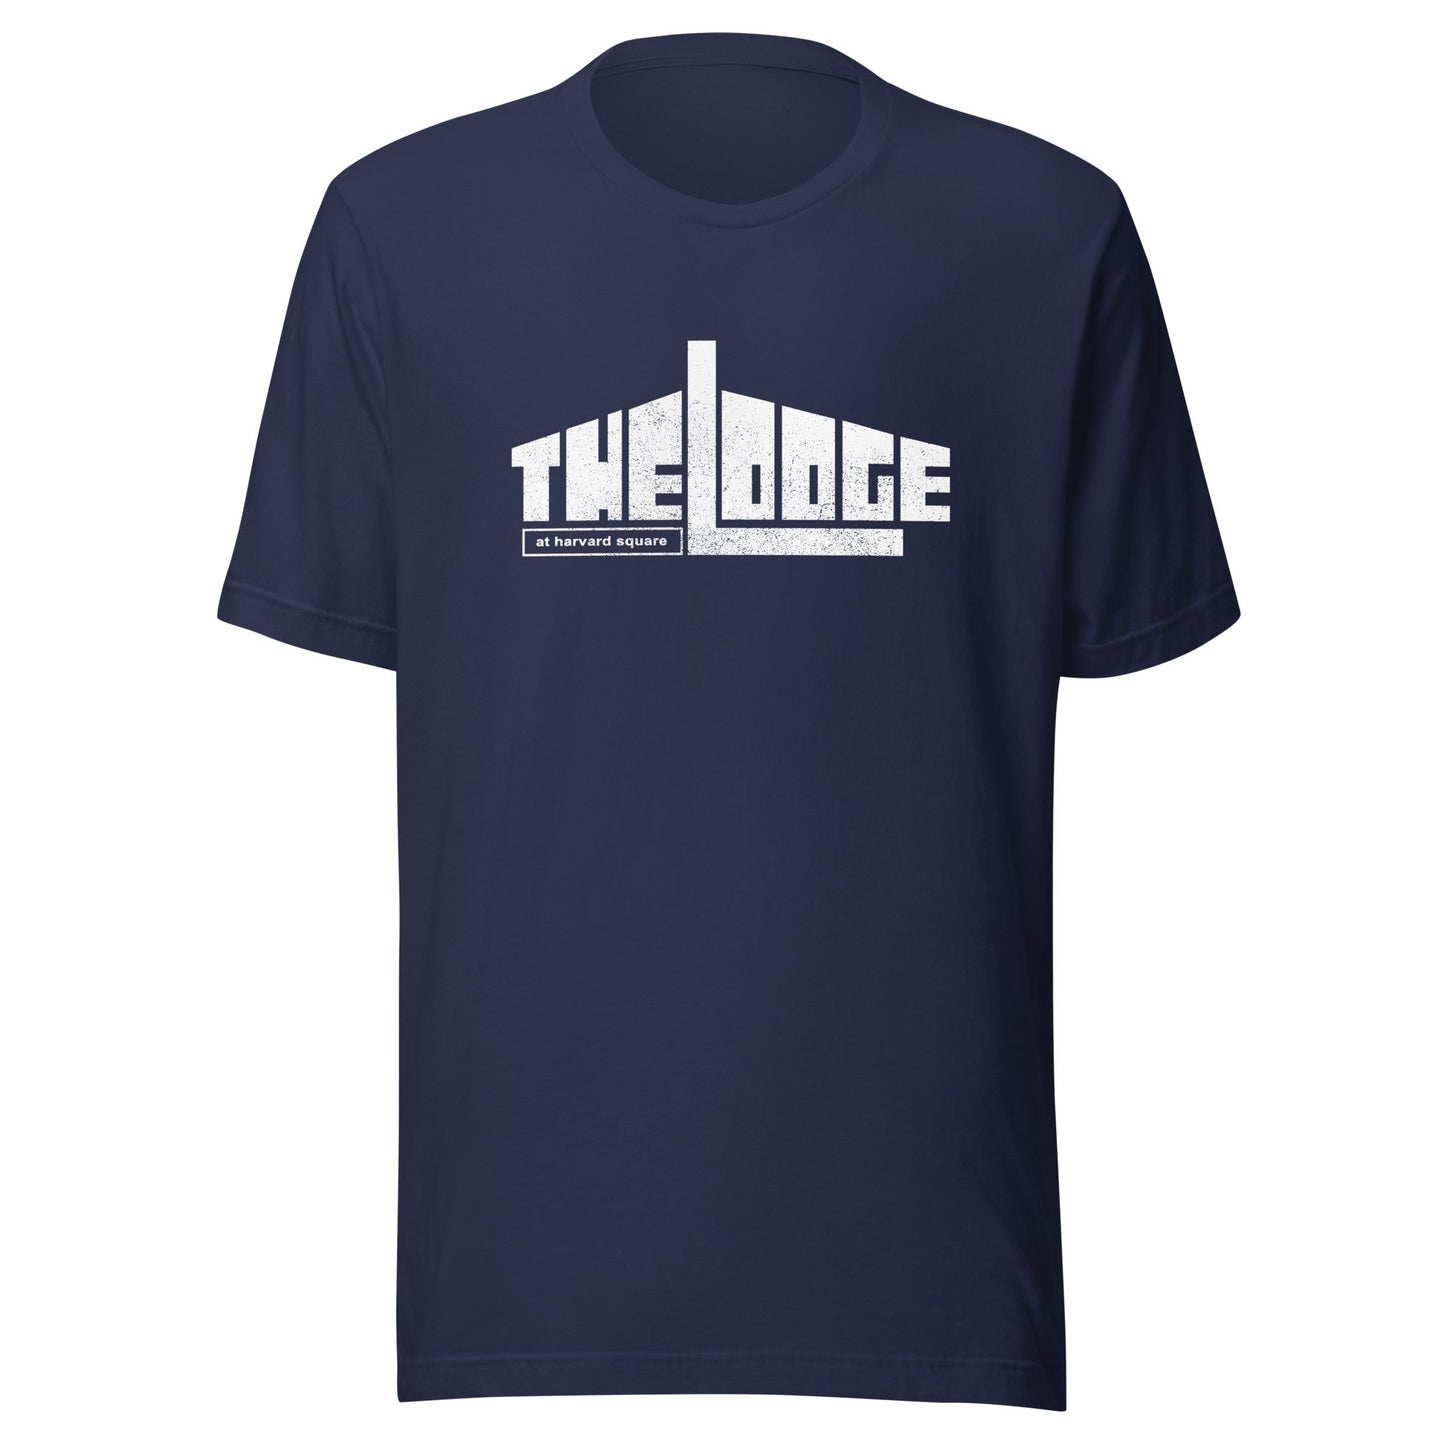 The Lodge at Harvard Square Retro T-Shirt - Vintage Clothing Store Graphic Tee